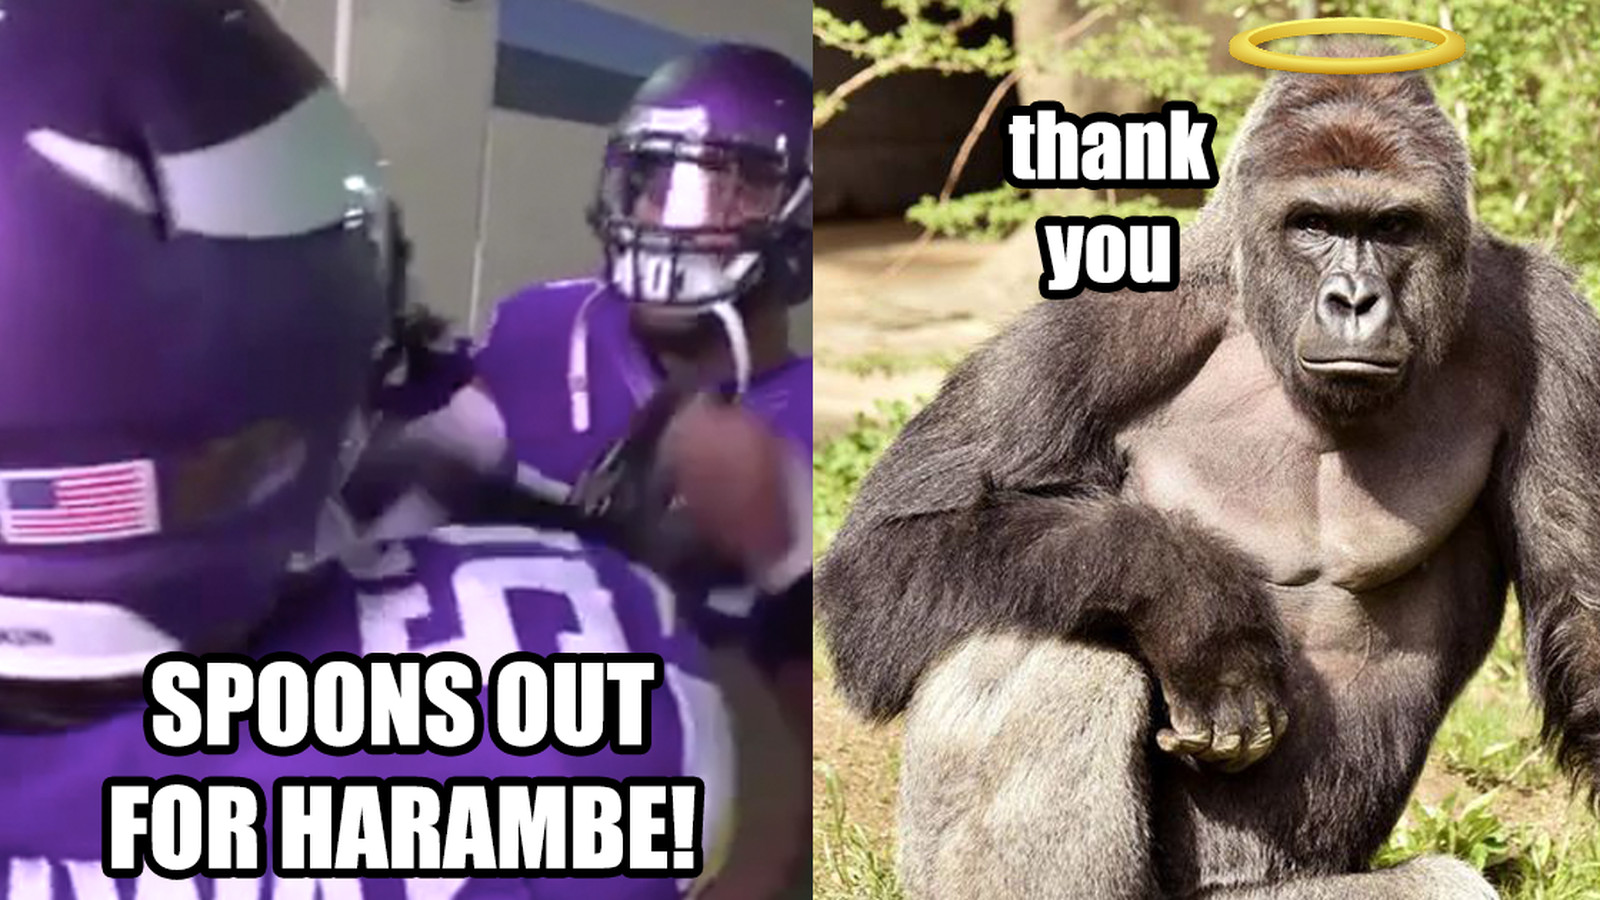 bengals win for harambe